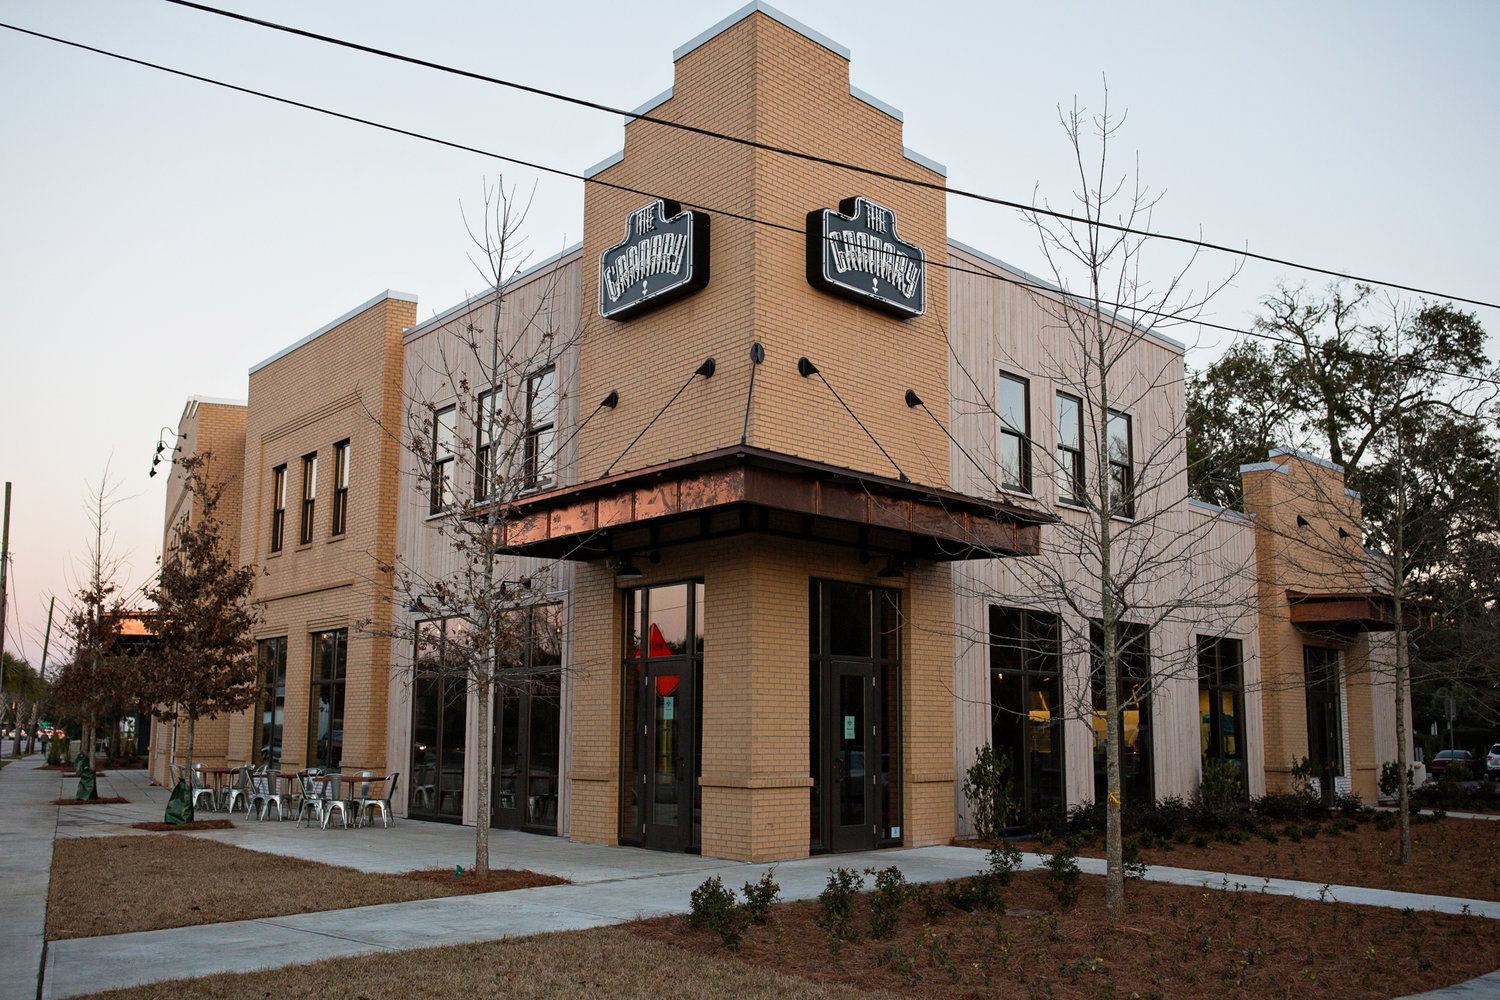 Exterior photo of The Granary in Mount Pleasant, SC outside of Charleston.